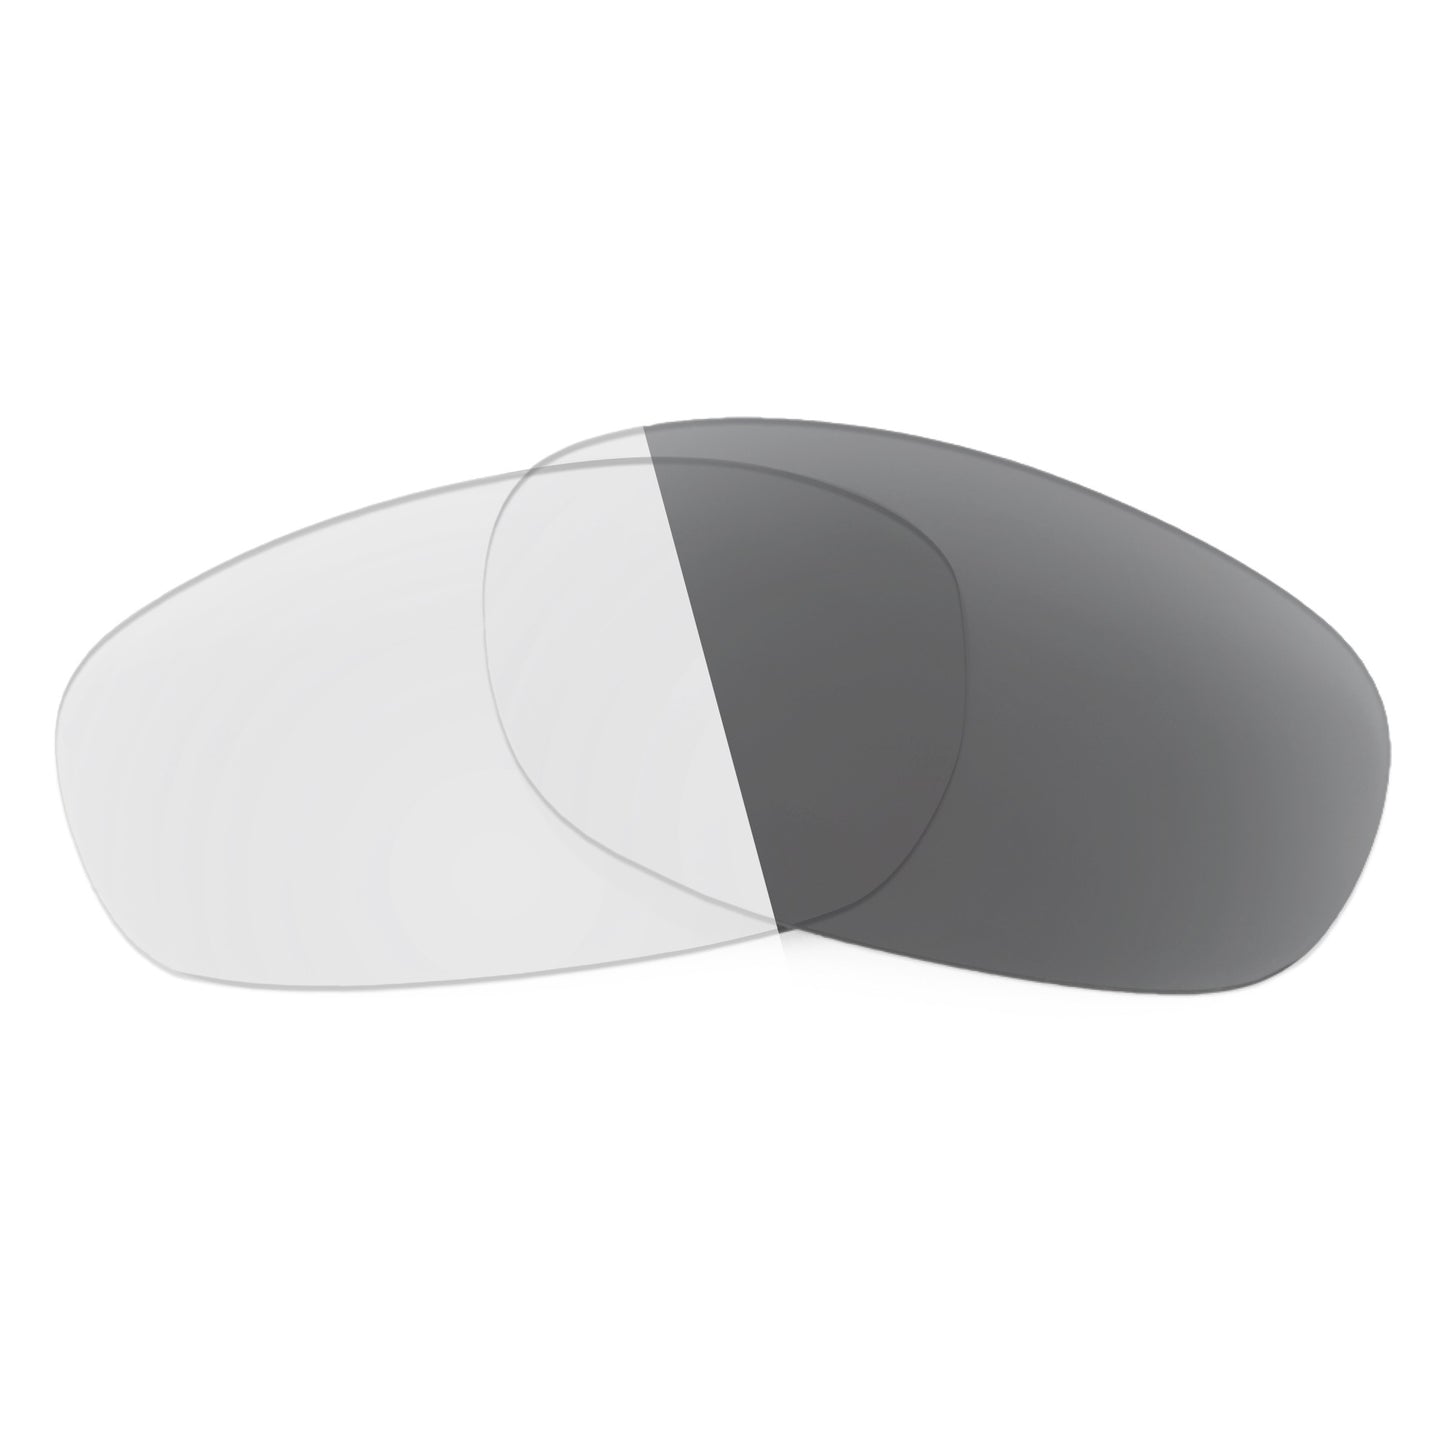 Revant replacement lenses for Ray-Ban RB3379 64mm Non-Polarized Adapt Gray Photochromic